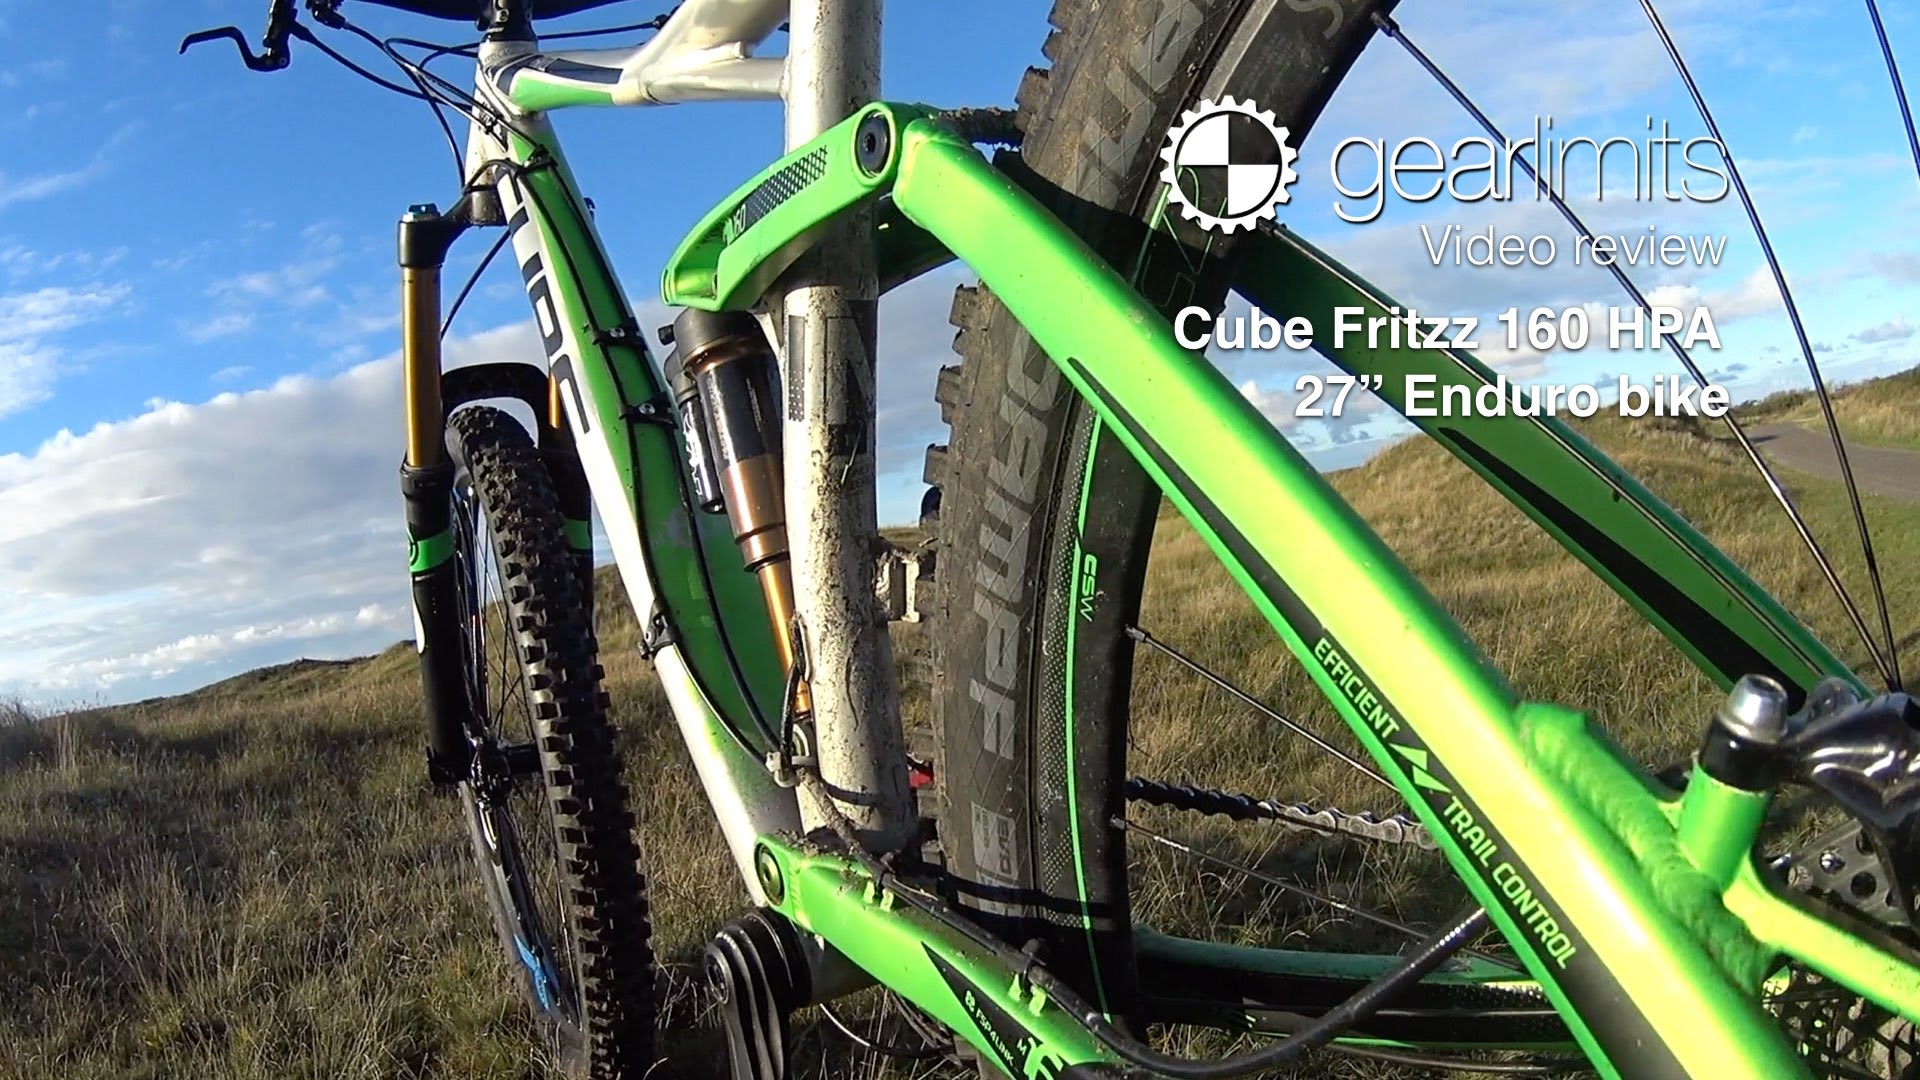 Videoreview: Cube Fritzz 160 HPA Enduro MTB